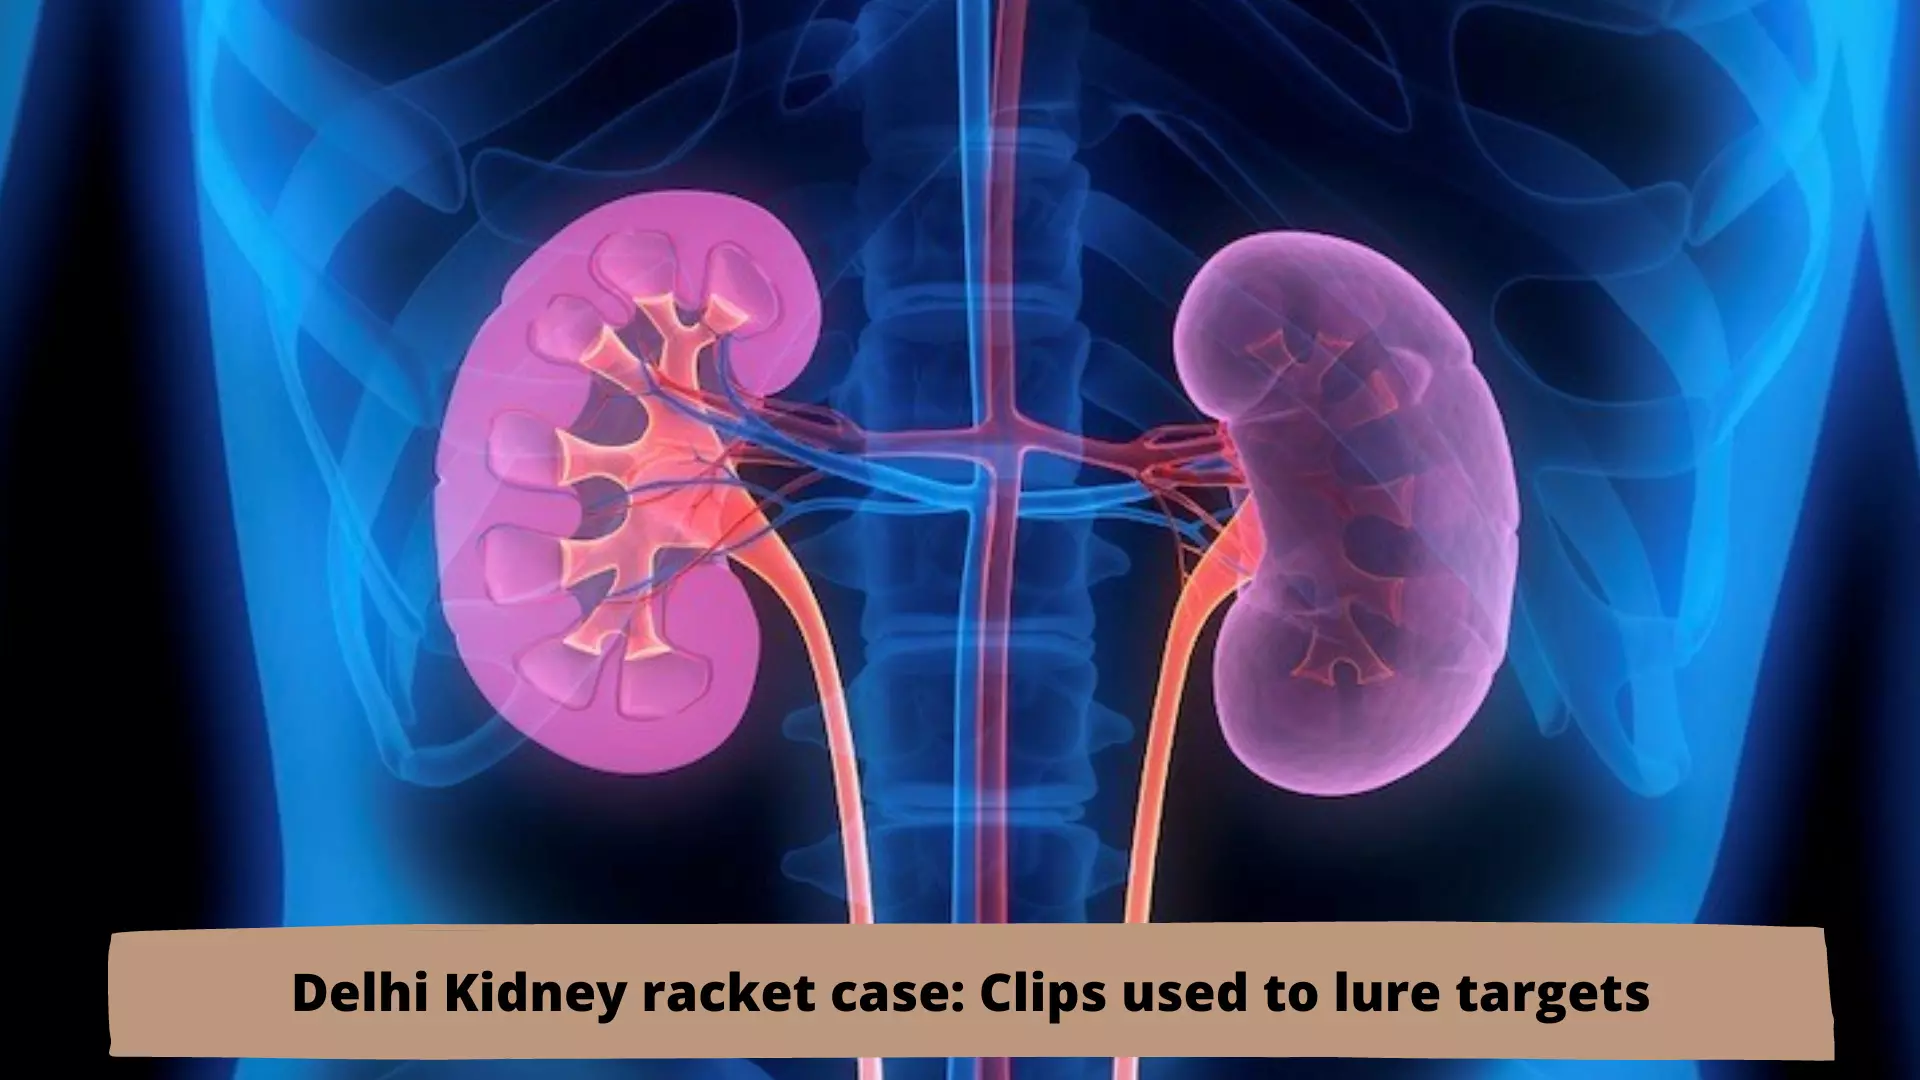 Delhi kidney racket case: Clips used to lure targets